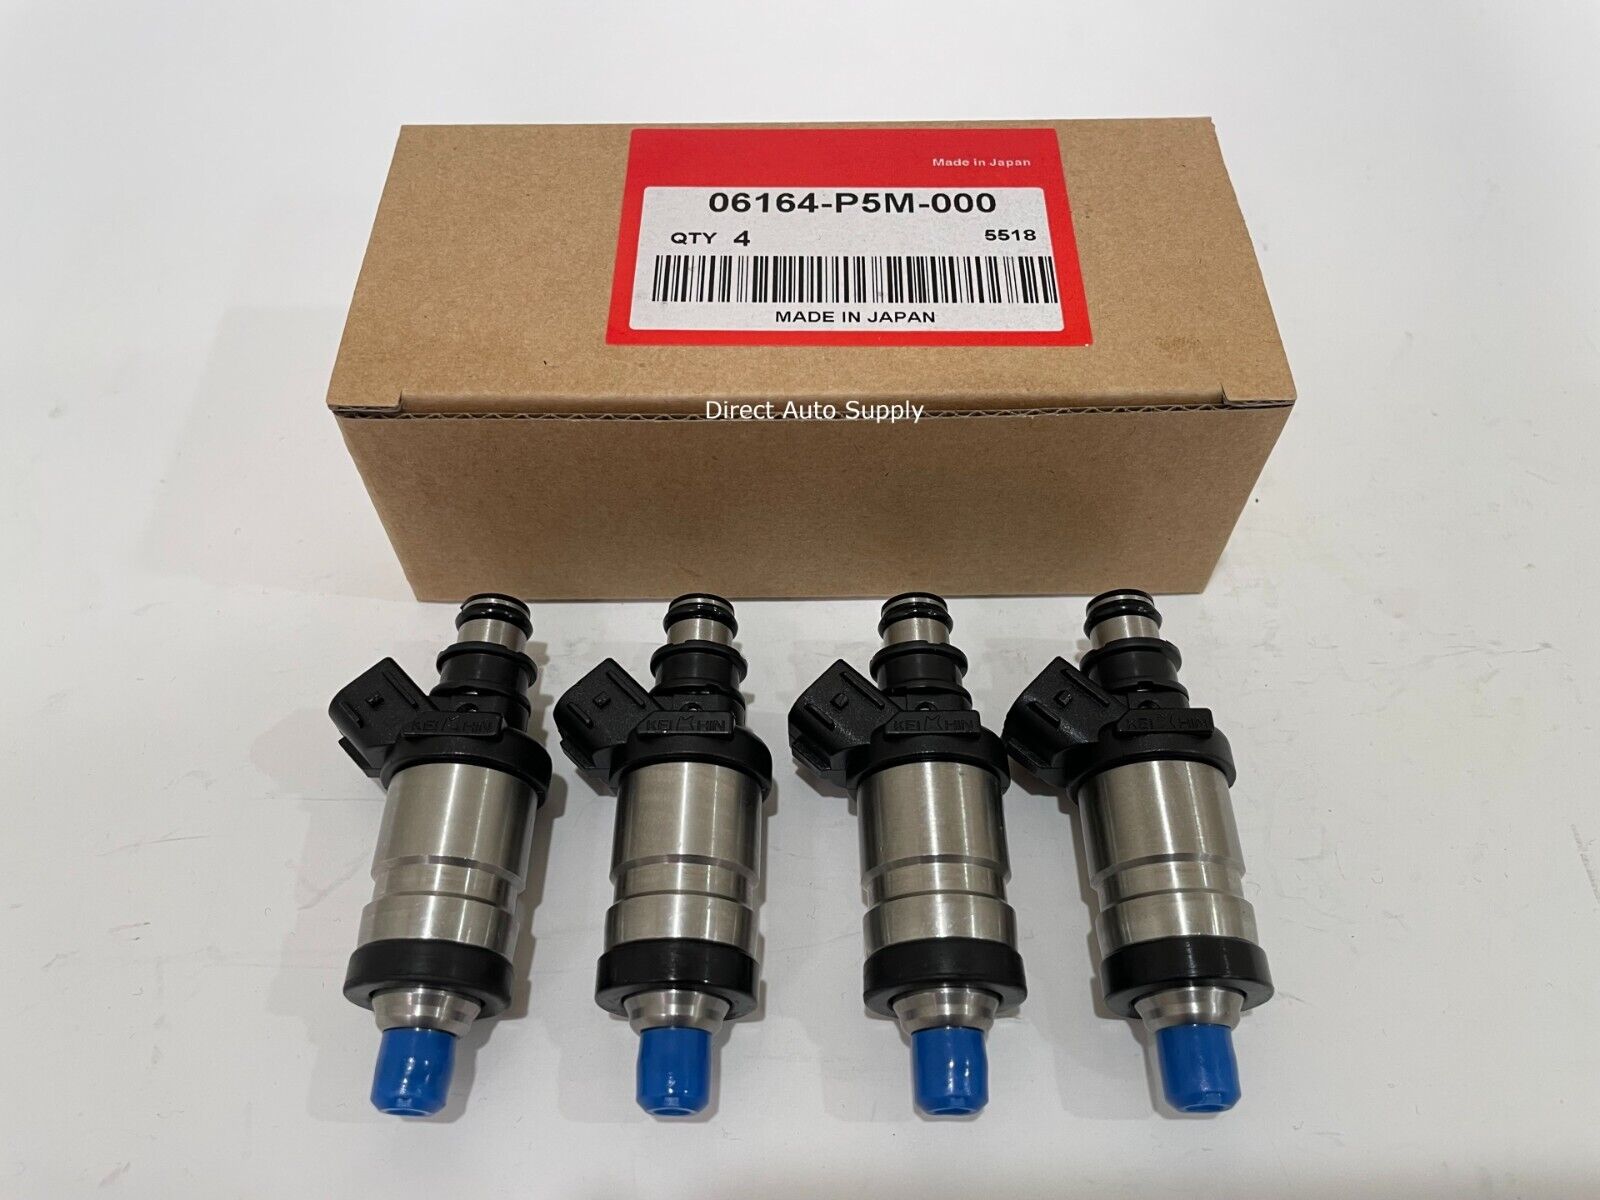 4 NEW OEM FUEL INJECTORS 06164-P5M-000 FOR 97-01 PRELUDE 2.2L